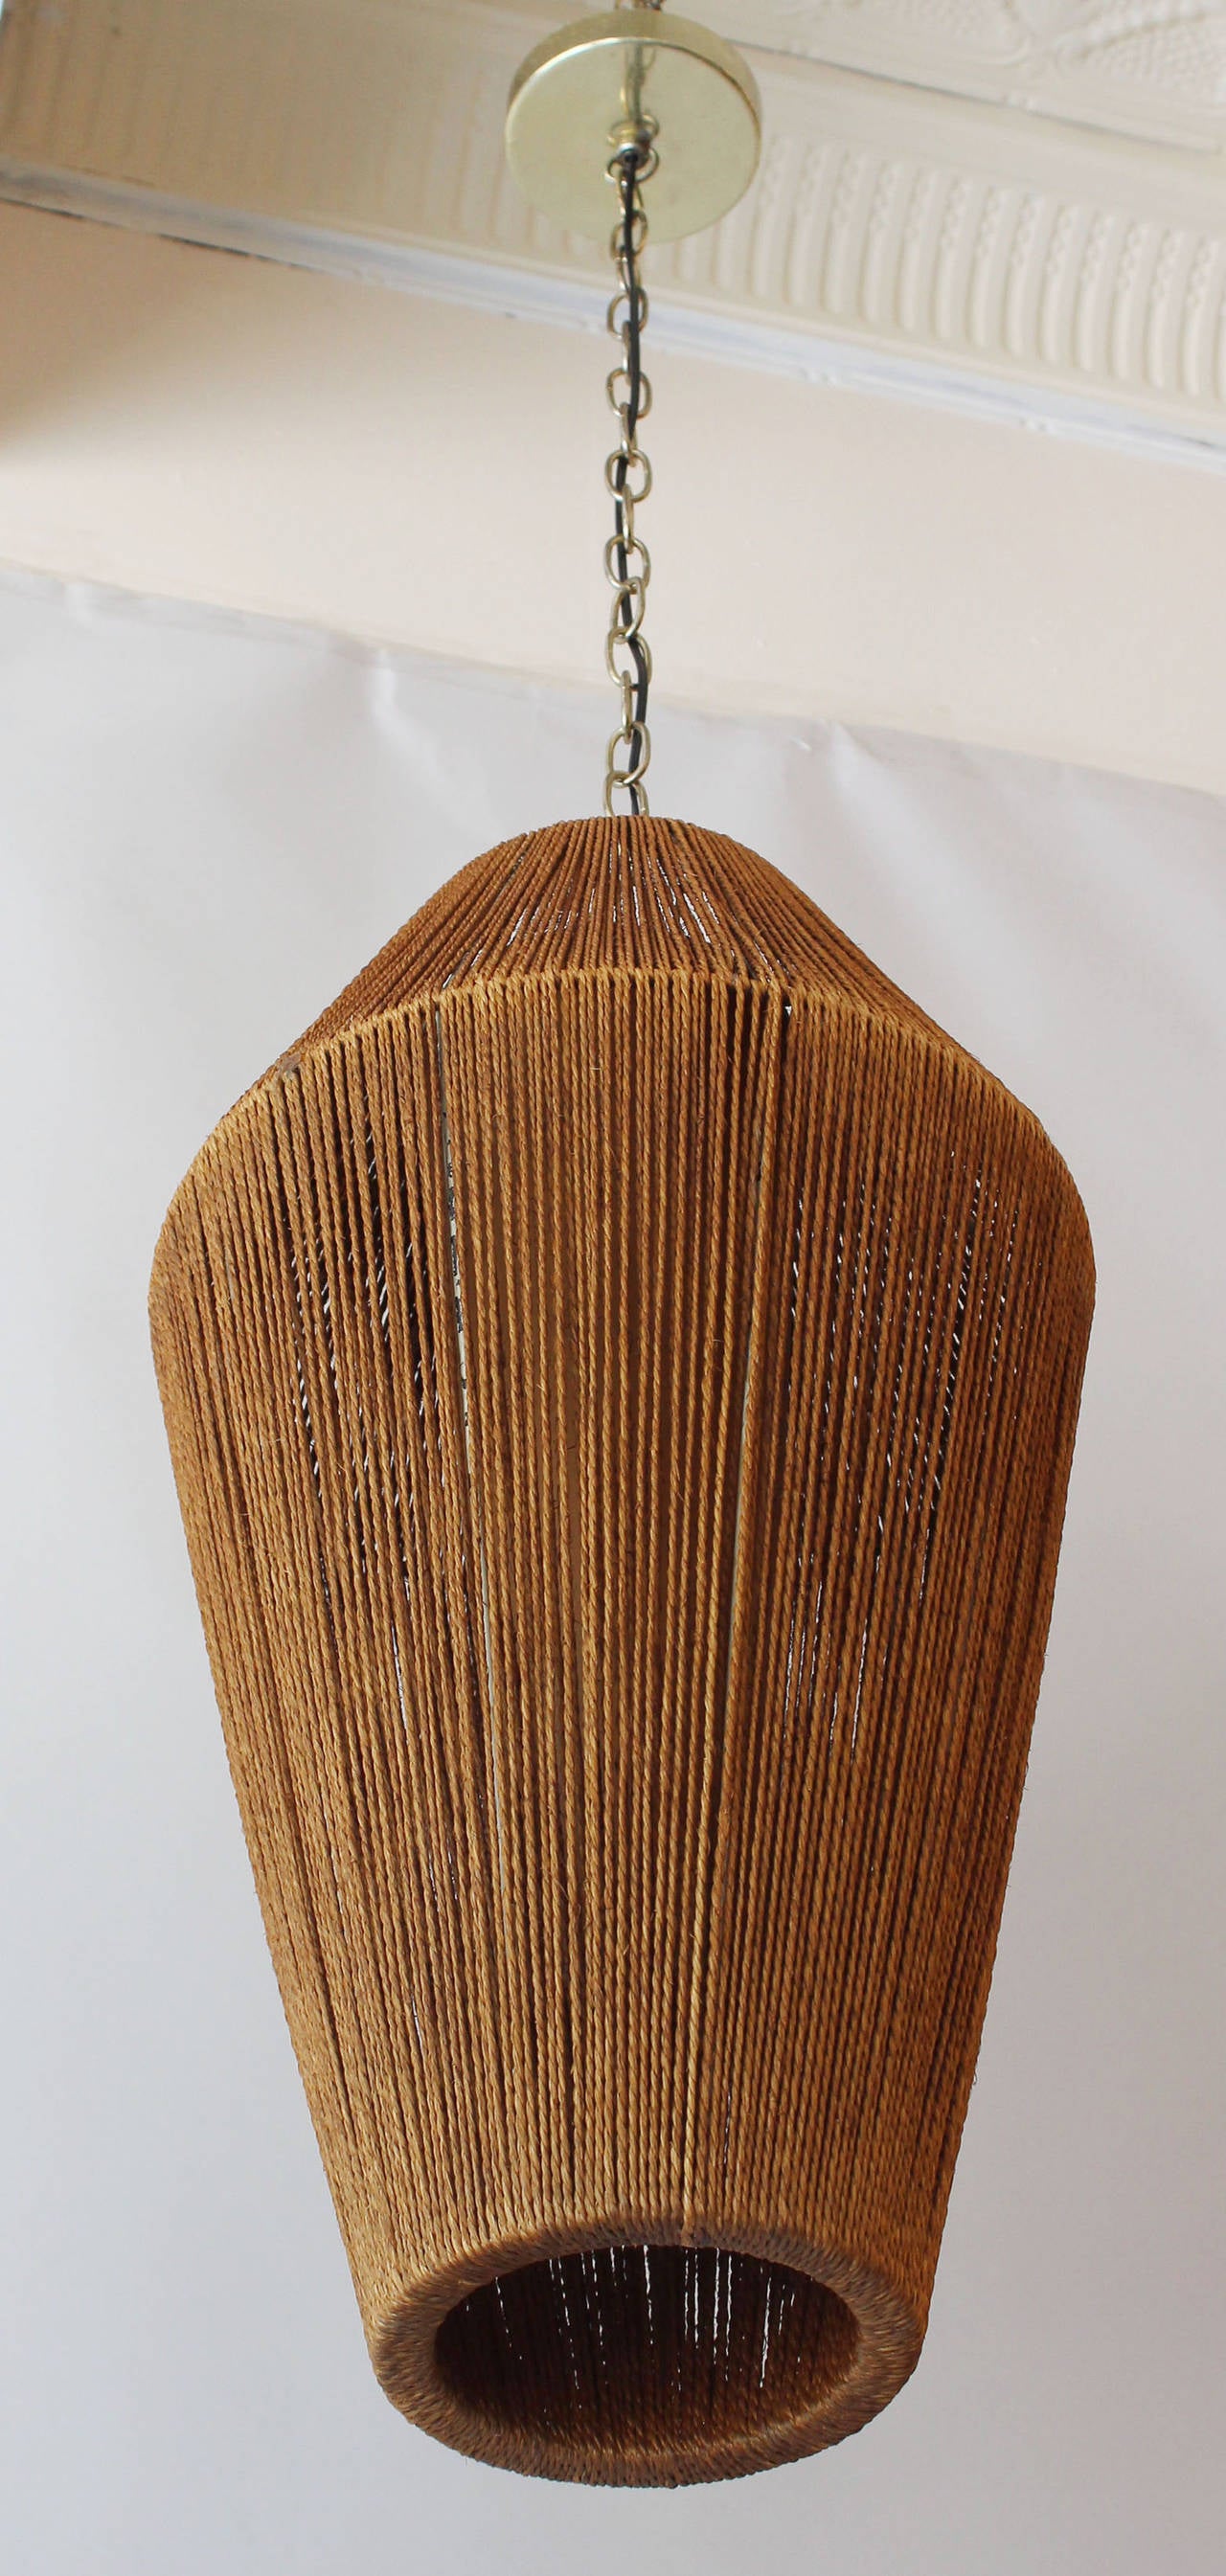 A metal and jute cord pendant with interior diffuser by Fog and Morup.